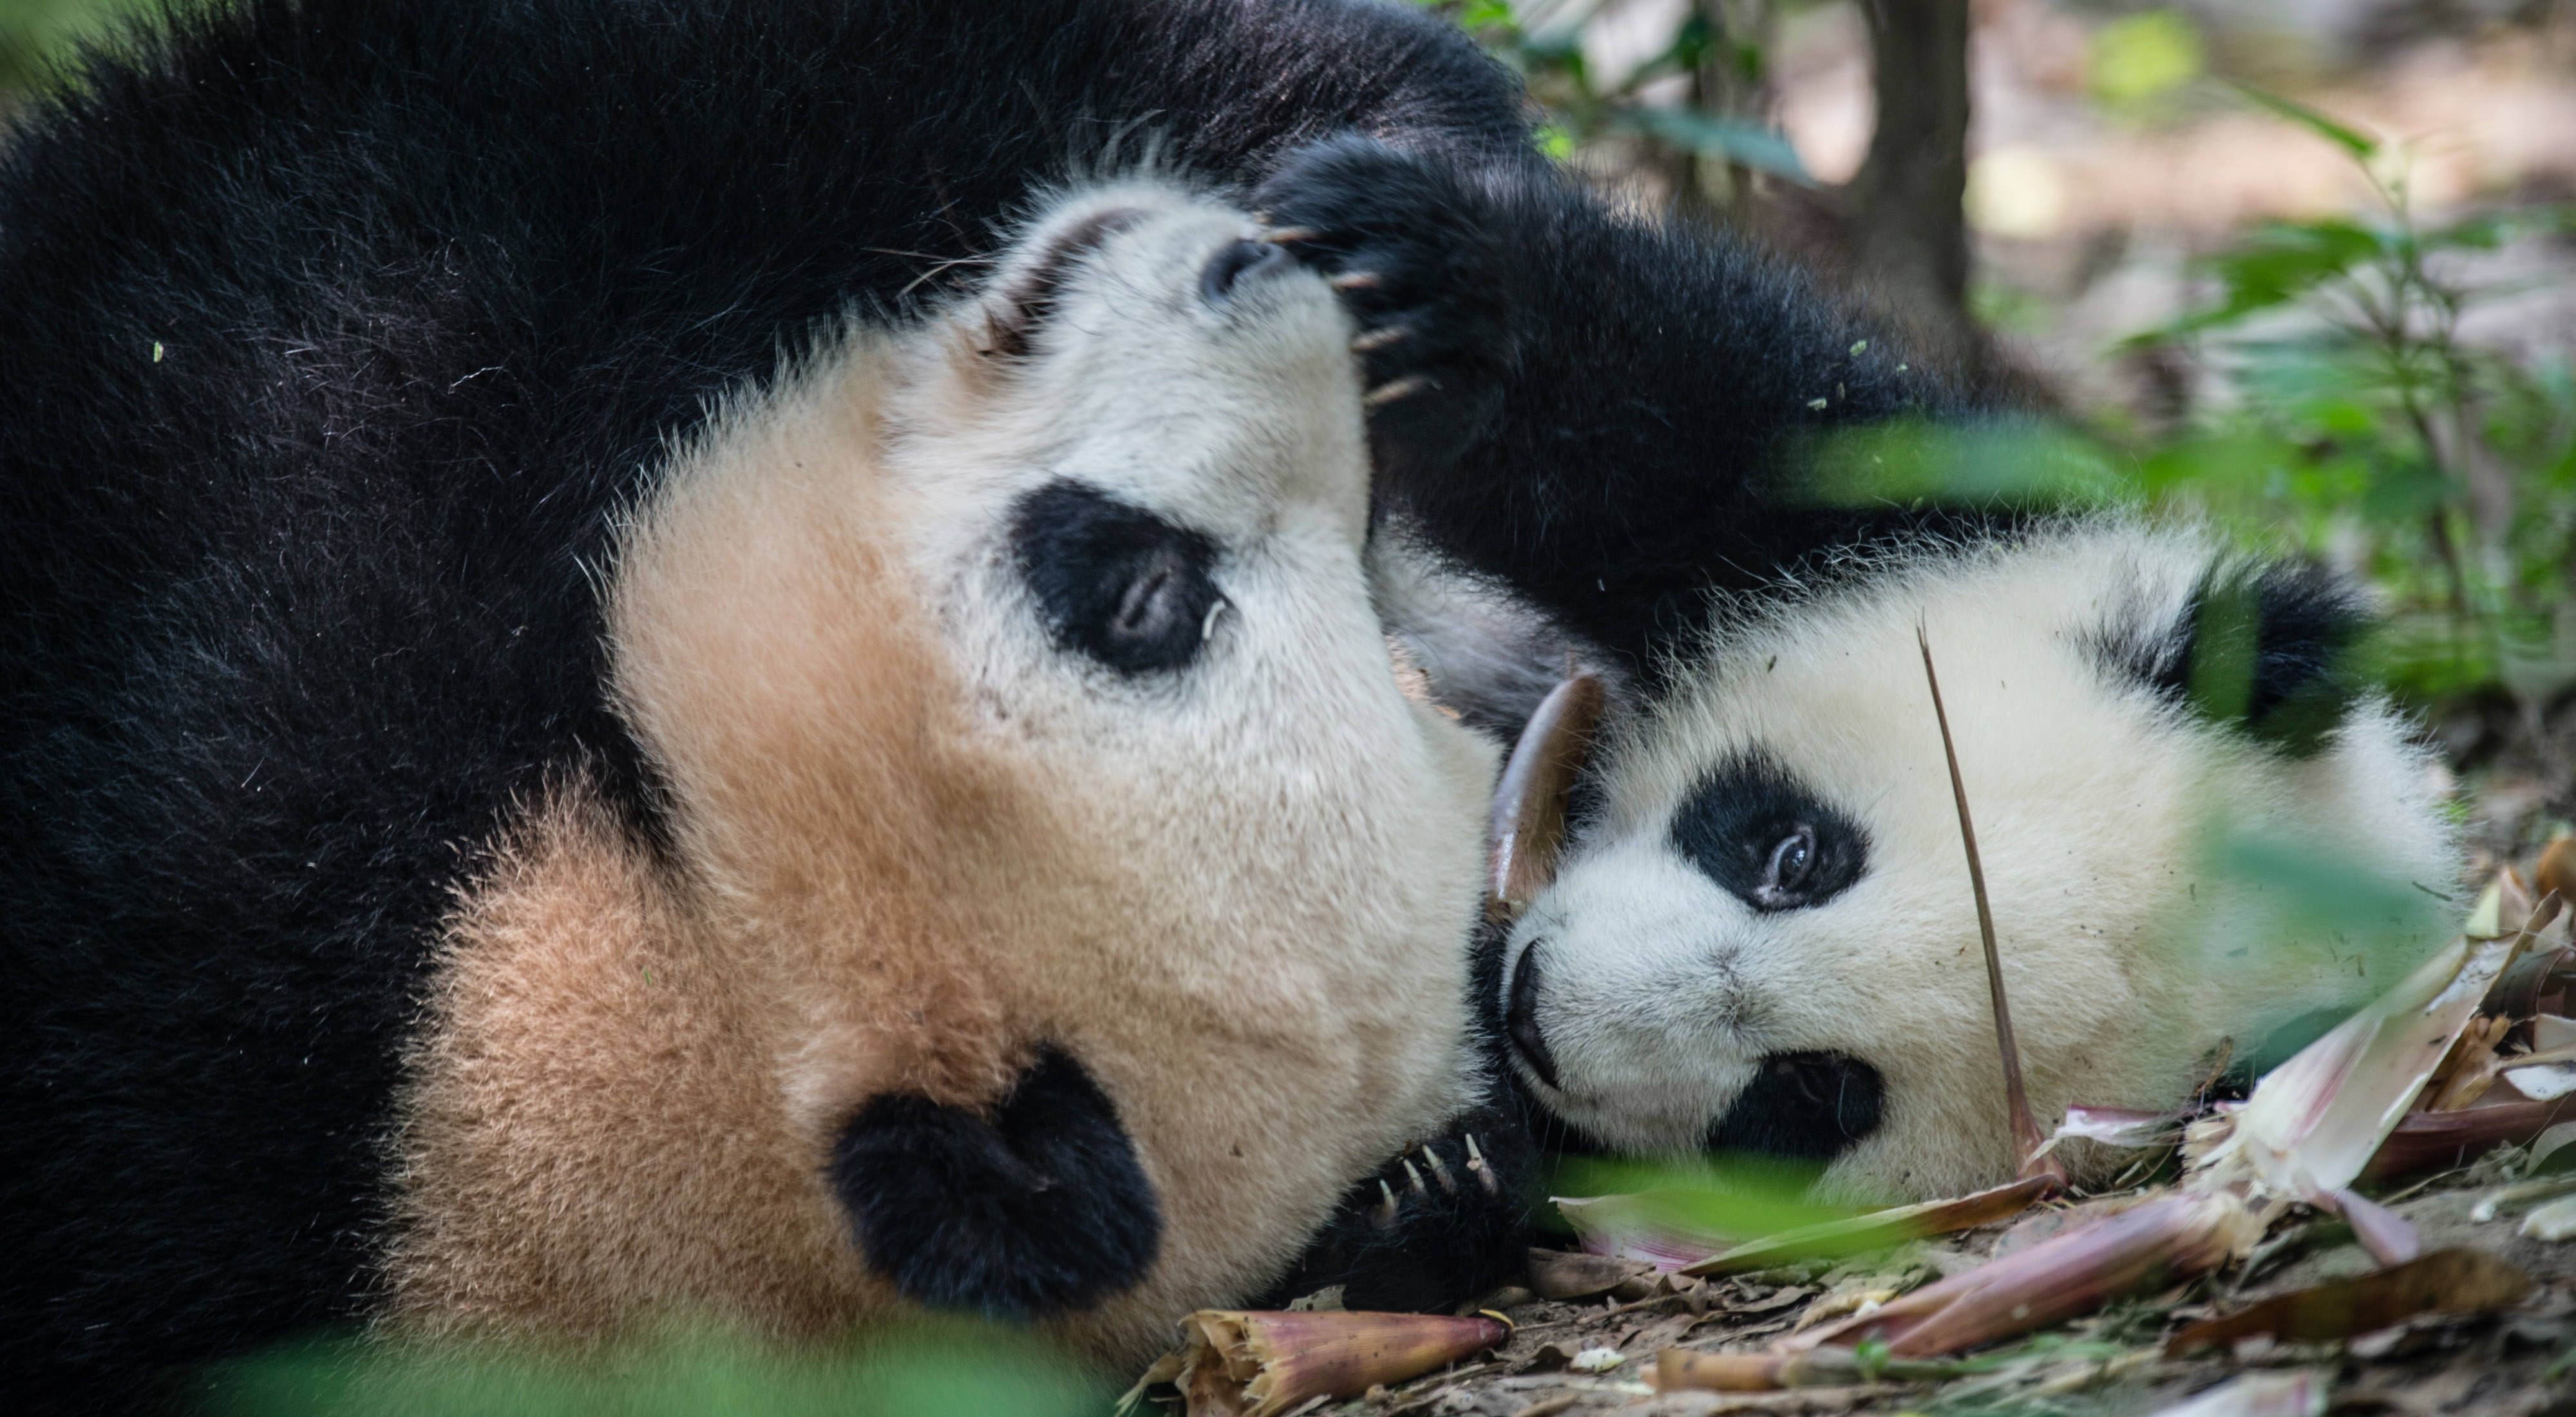 Two giant pandas roll on the ground as they play together.